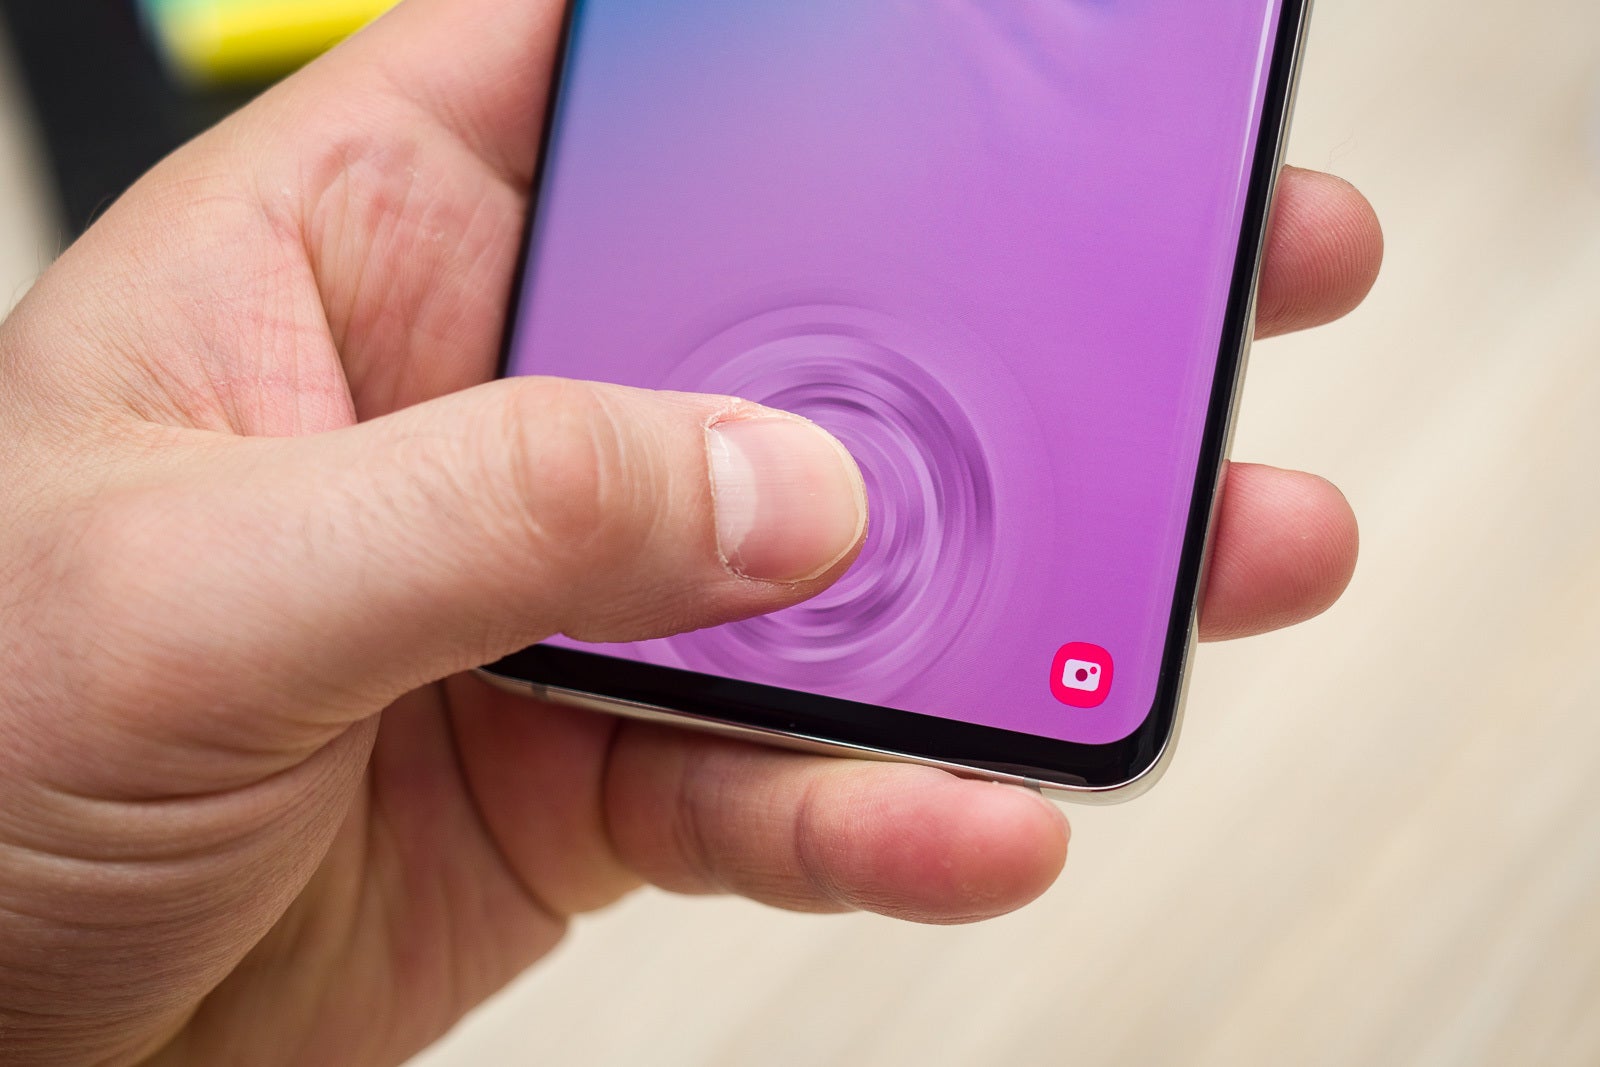 The in-display fingerprint scanner on the Galaxy S10+ - Samsung Galaxy A90 tipped to sport huge display and powerful processor